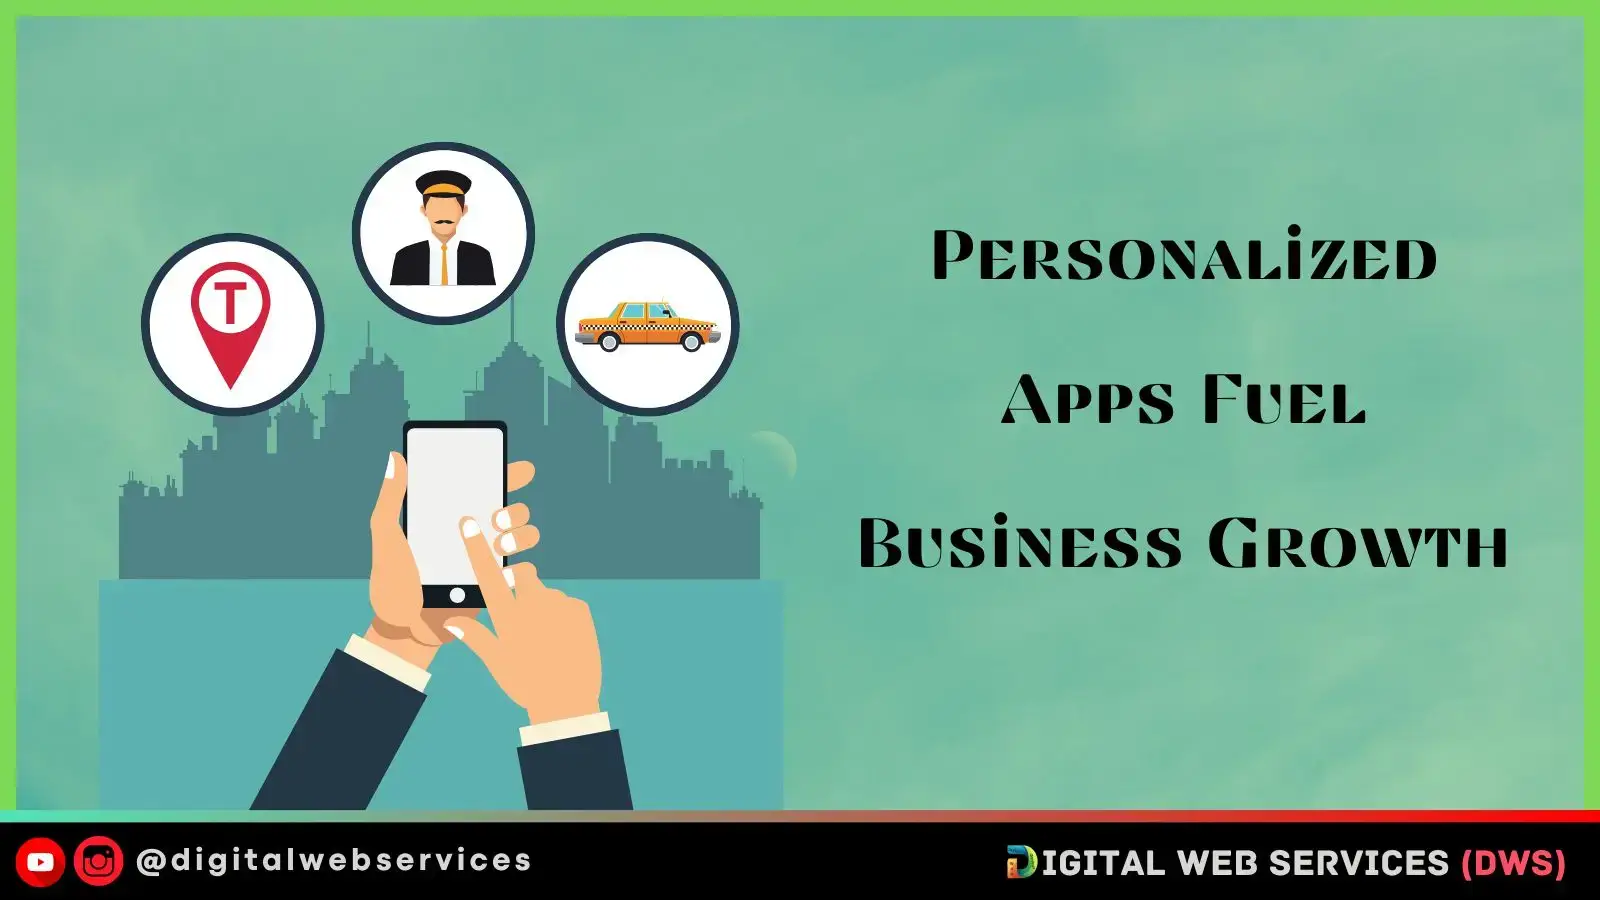 Personalized Apps Fuel Business Growth